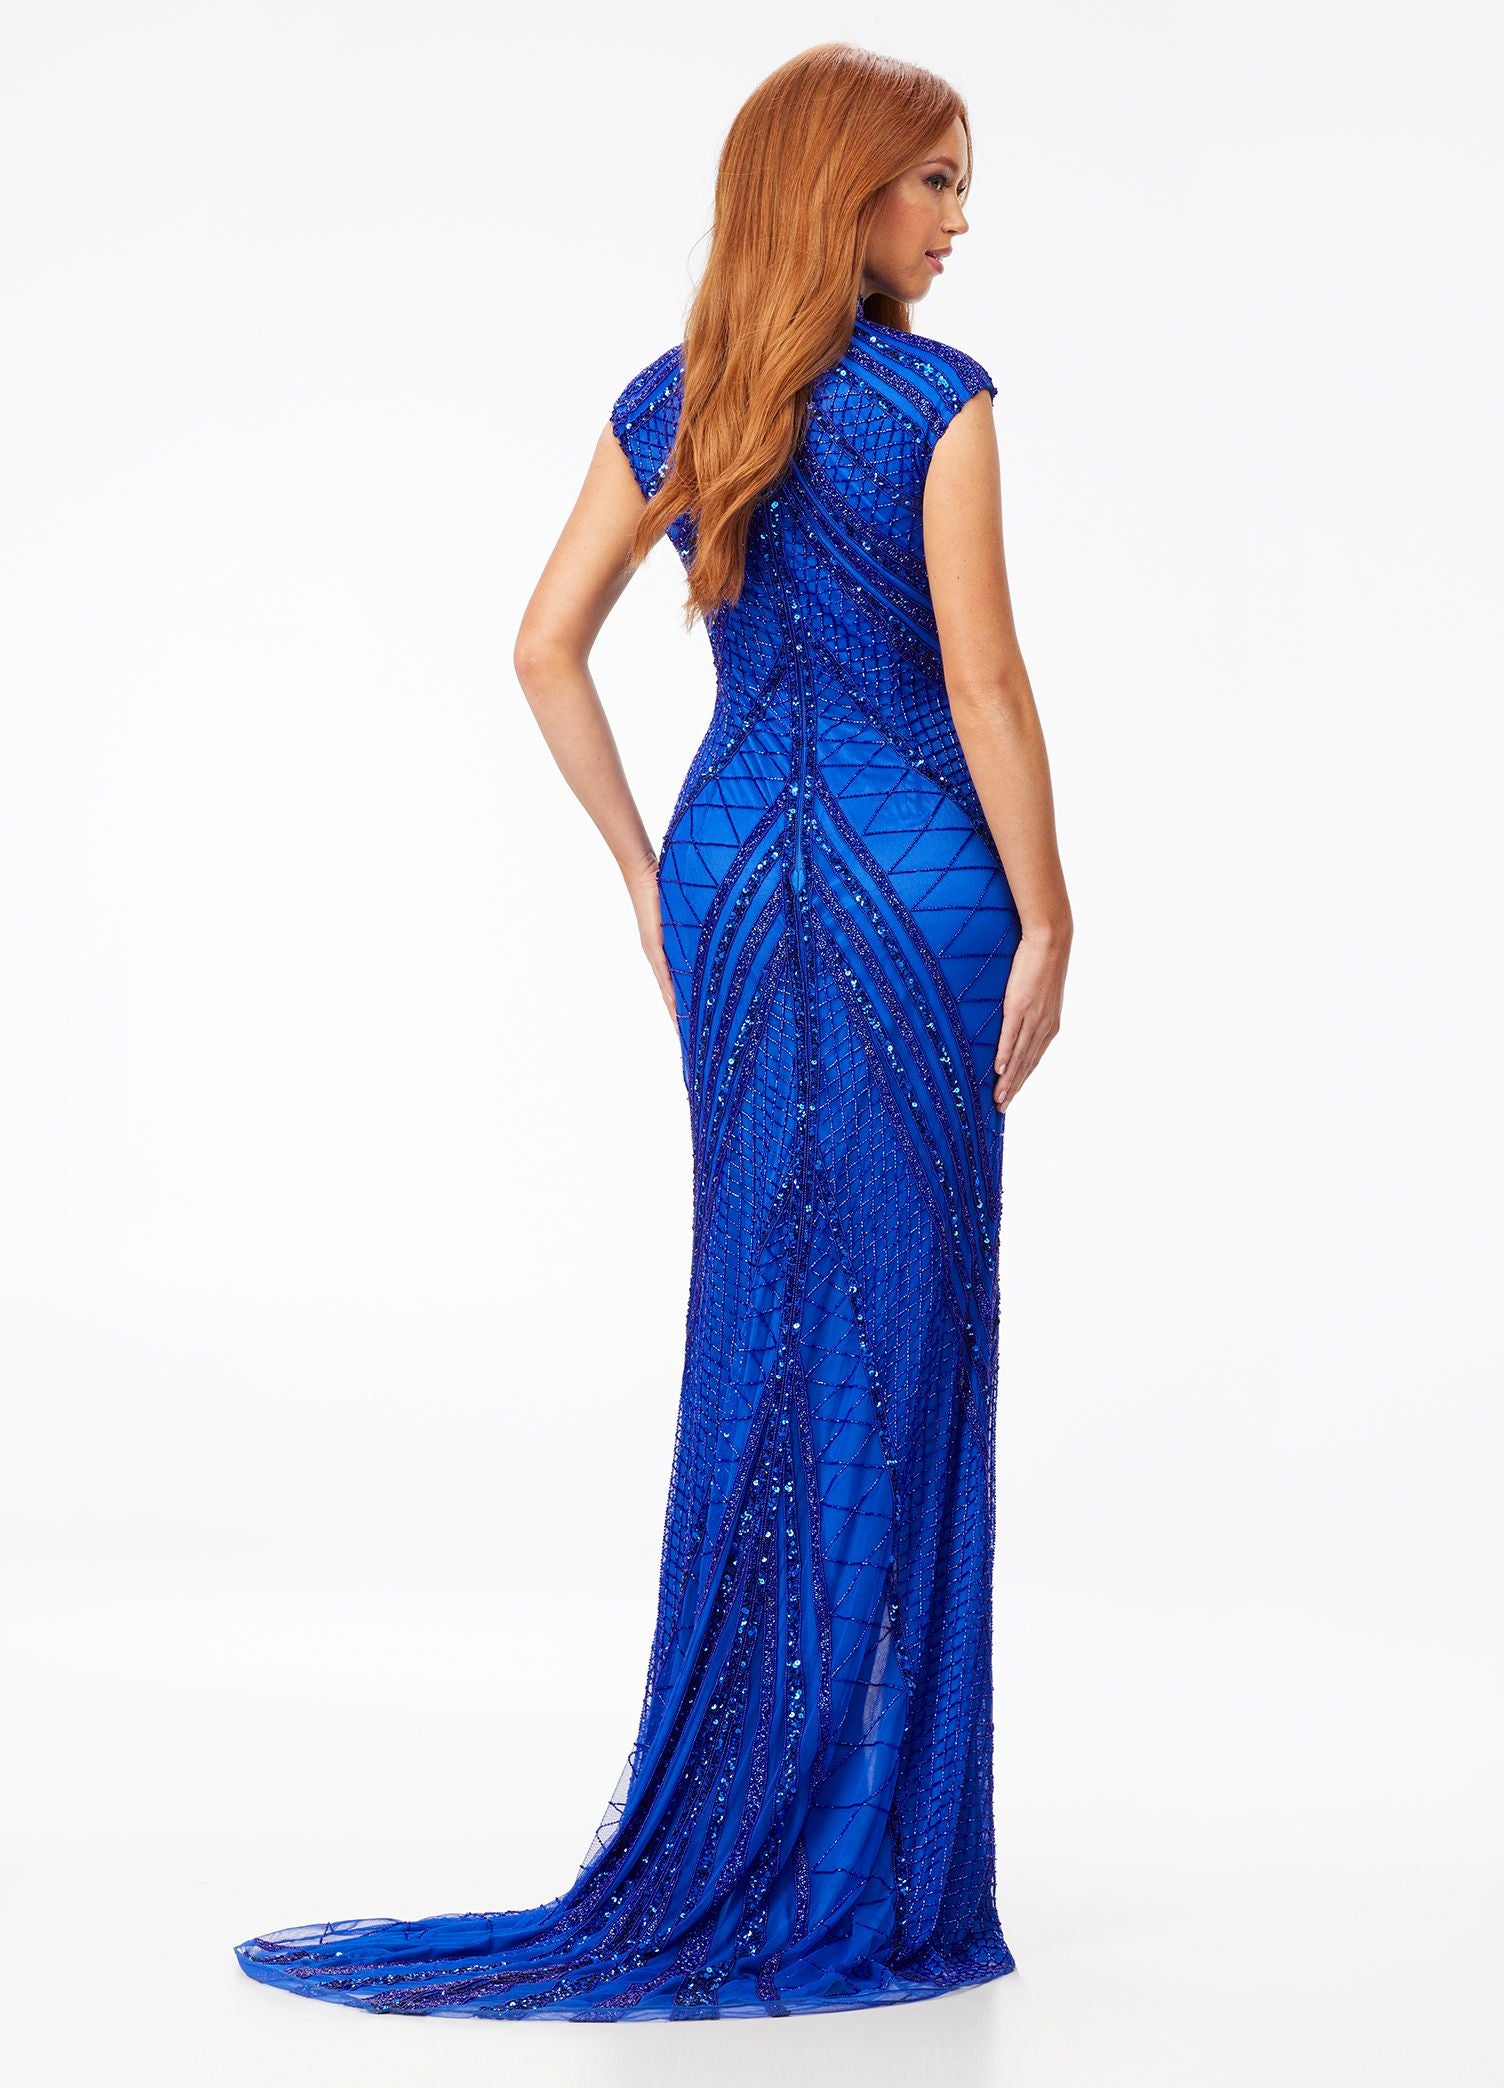 Ashley-Lauren-1624-Royal-Blue-high-neckline-beaded-sequins-fitted-evening-gown-with-front-slit-with-a-figure-flattering-beaded-design-pageant-gown-prom-dress-2